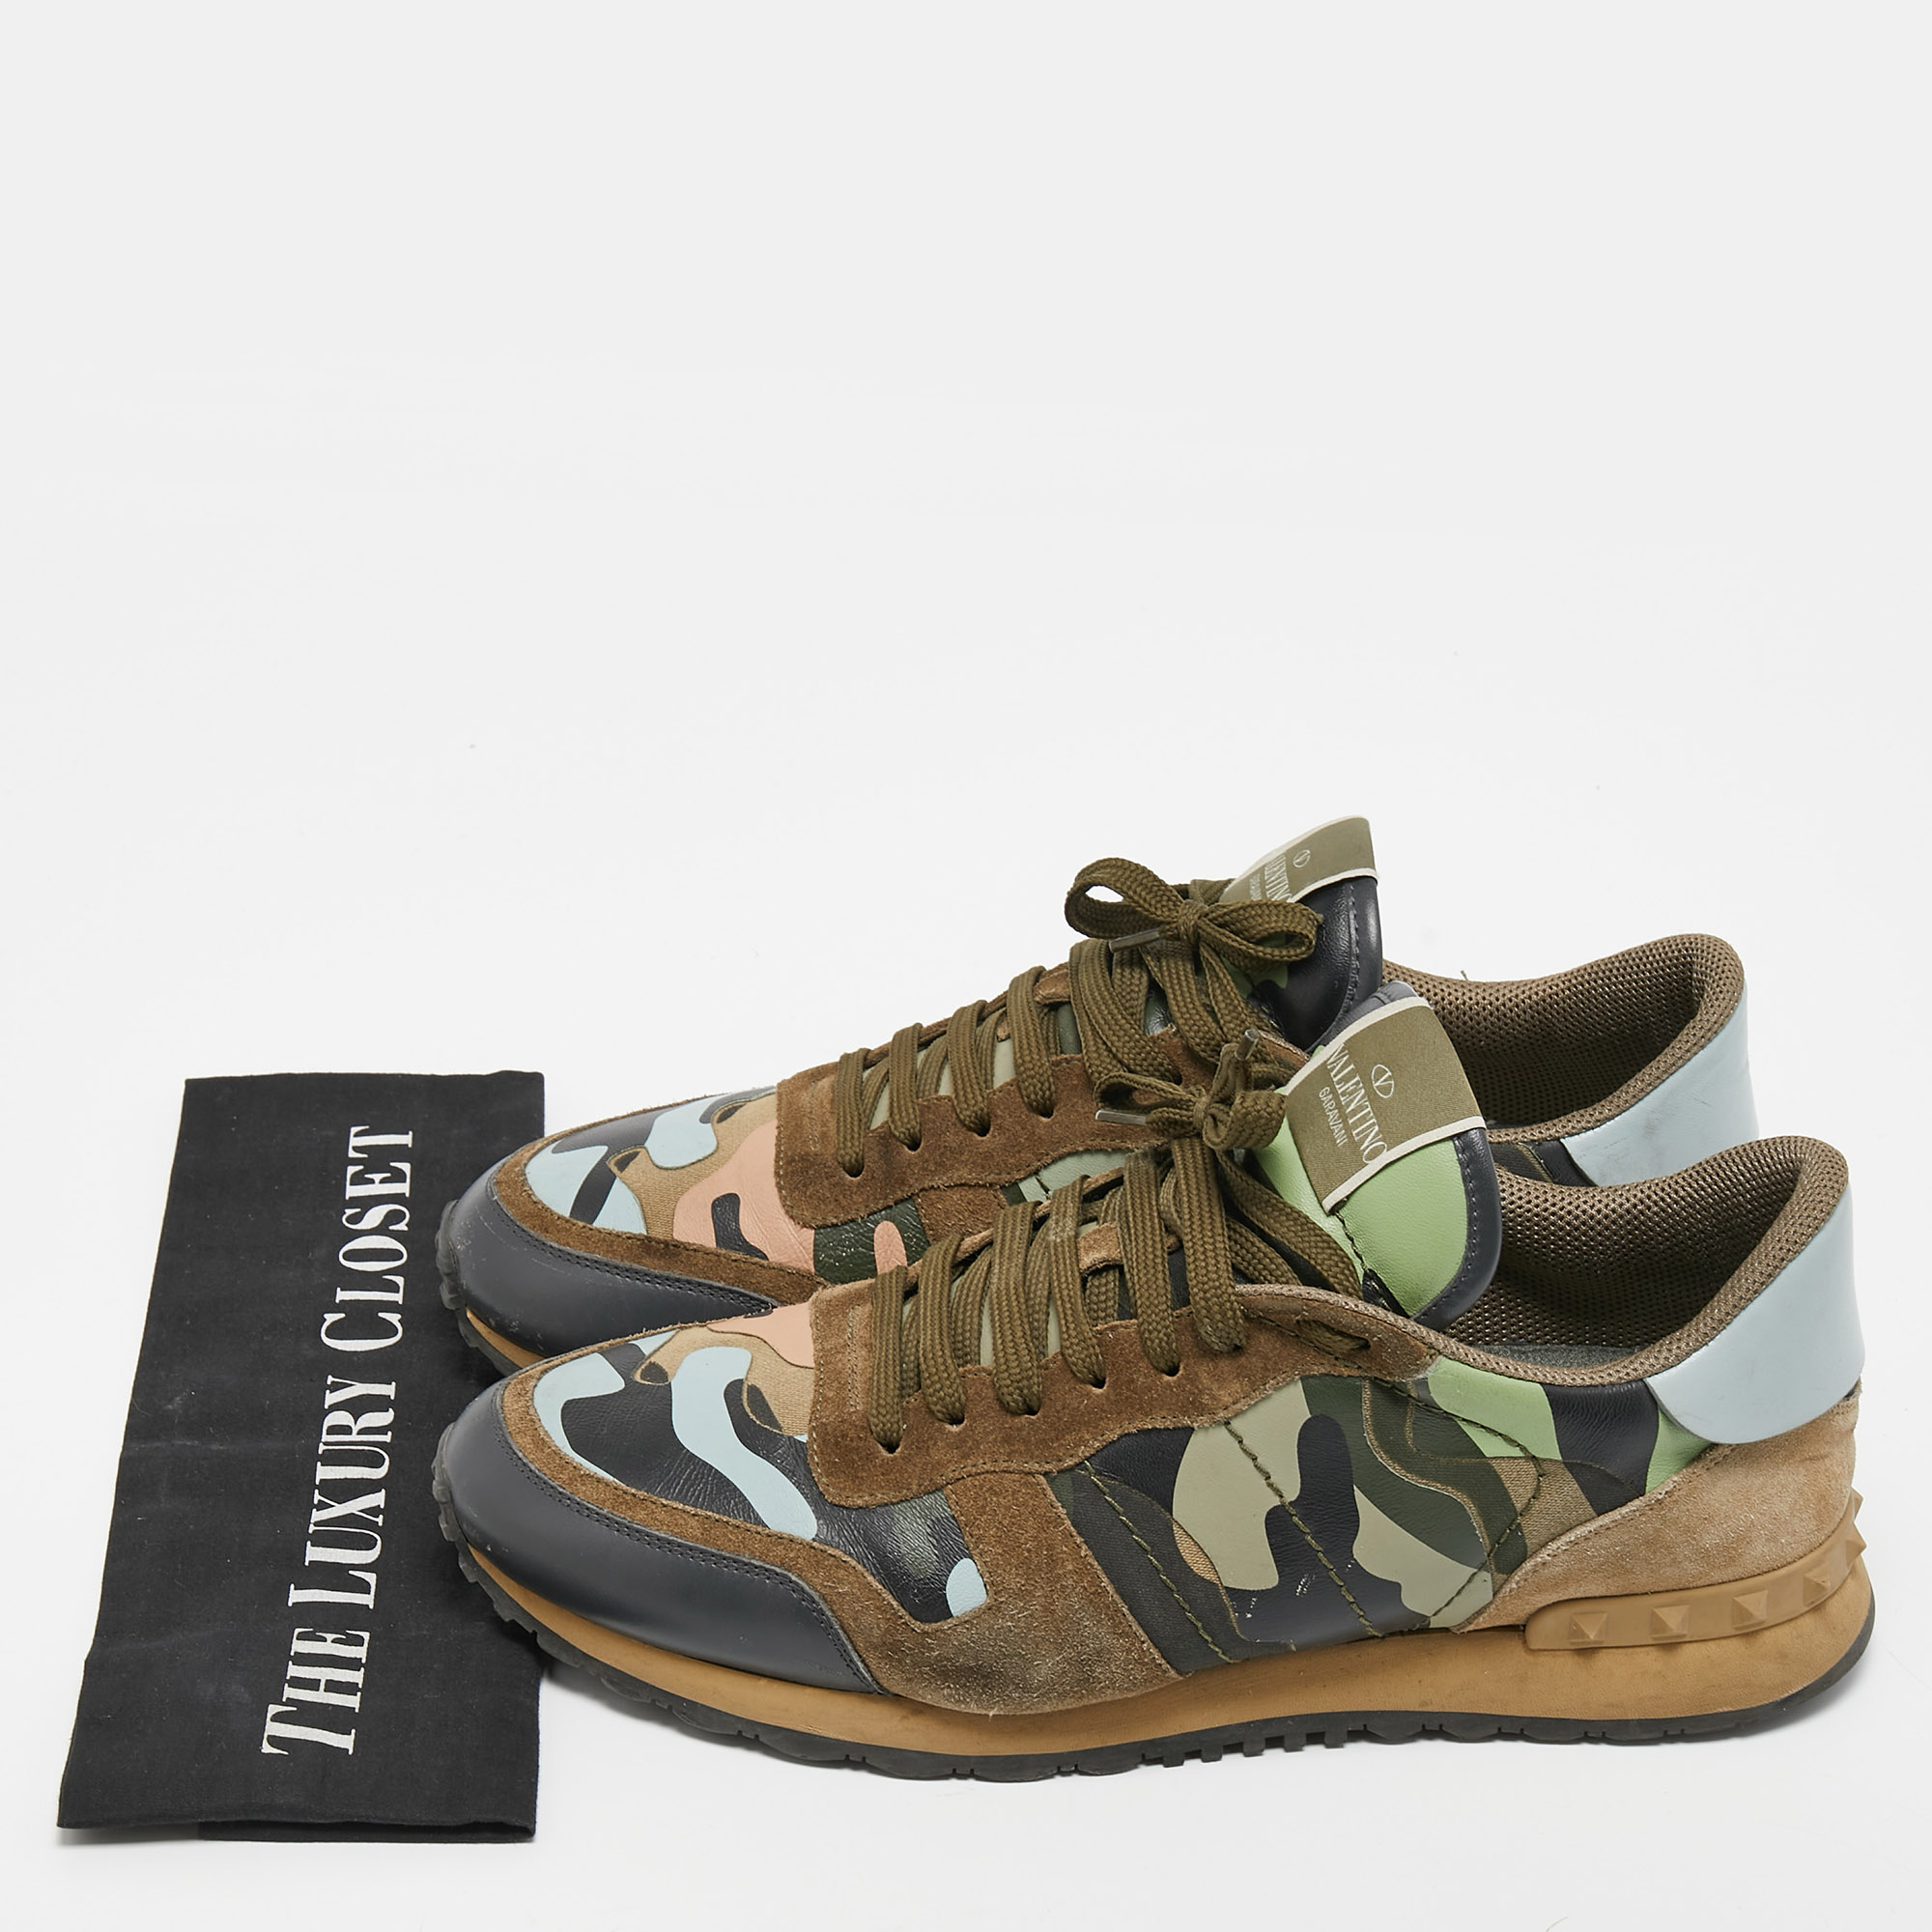 Valentino Multicolor Camouflage Suede And Leather Rockrunner Sneakers Size 43